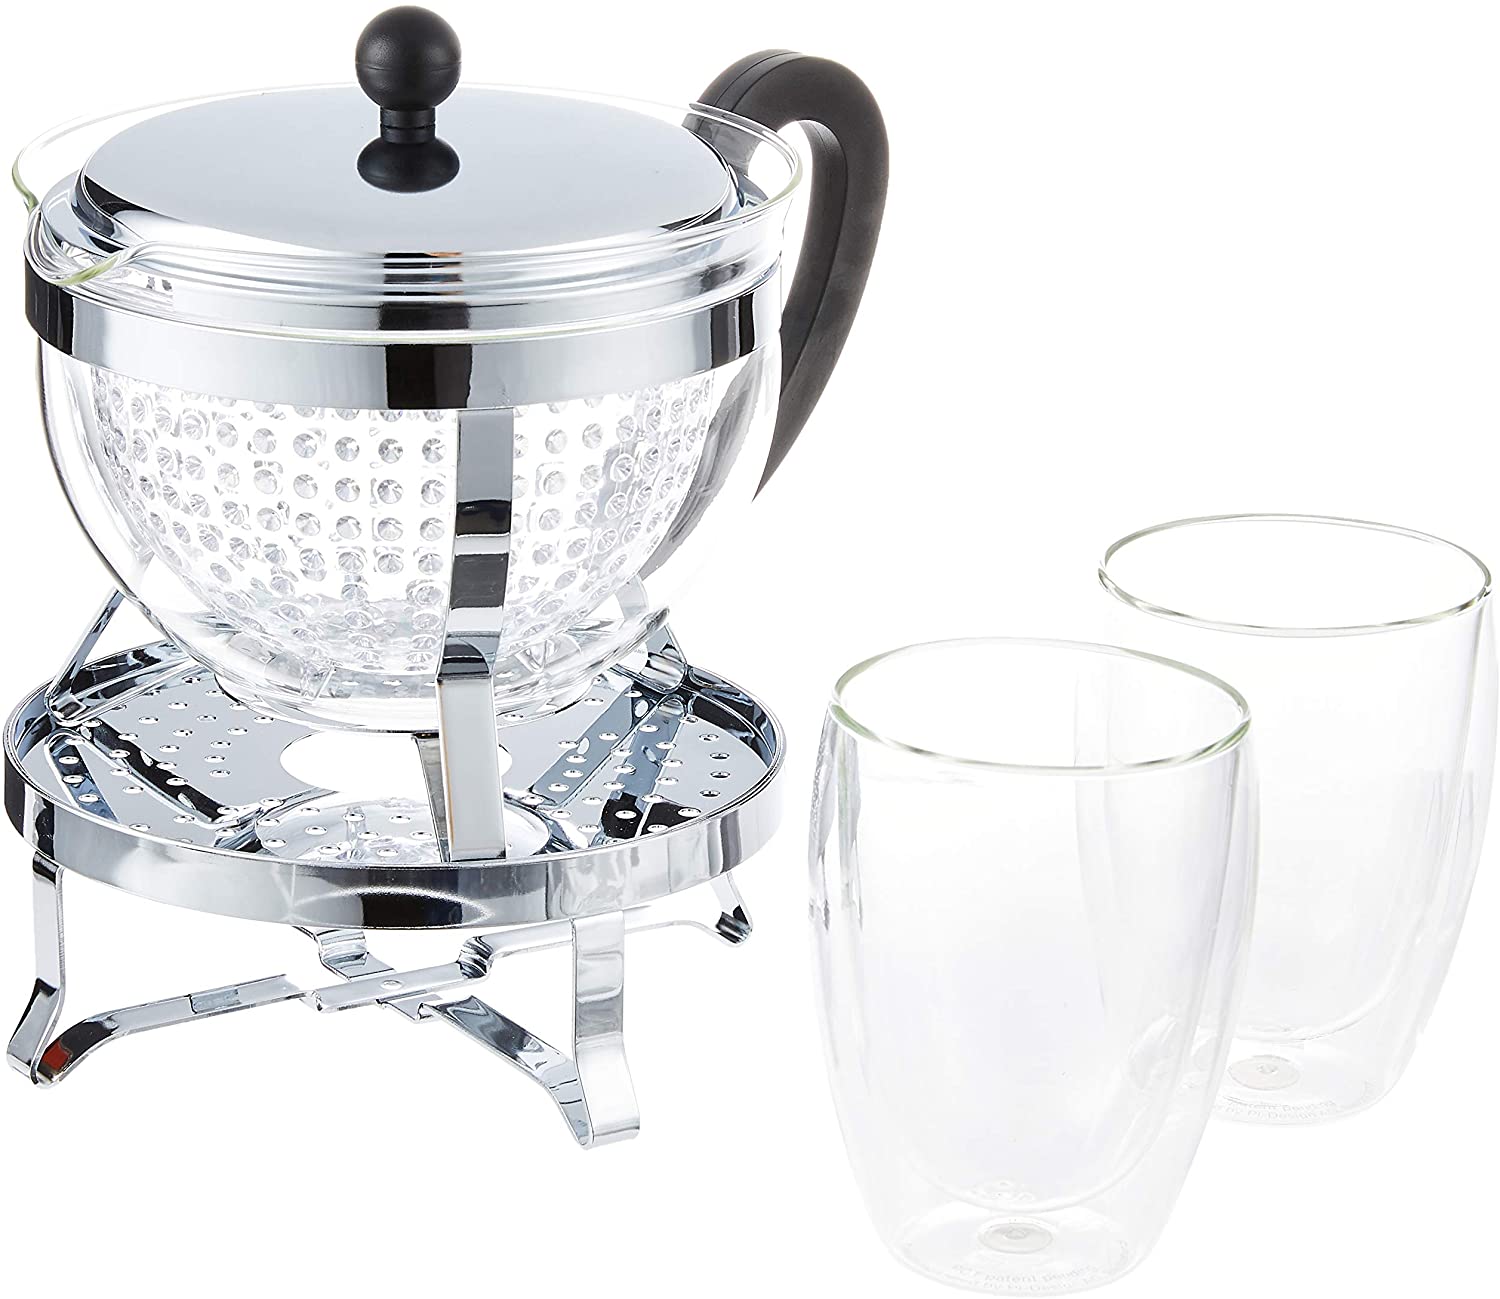 Bodum K11143 16 1 Chambord Tea Set with Rechaud 1.5 L and 2 pack of Double Wall Glasses Pavina 0.35 Litre Tea Maker with Layered – 16.8 x 23.1 x 22.3 cm